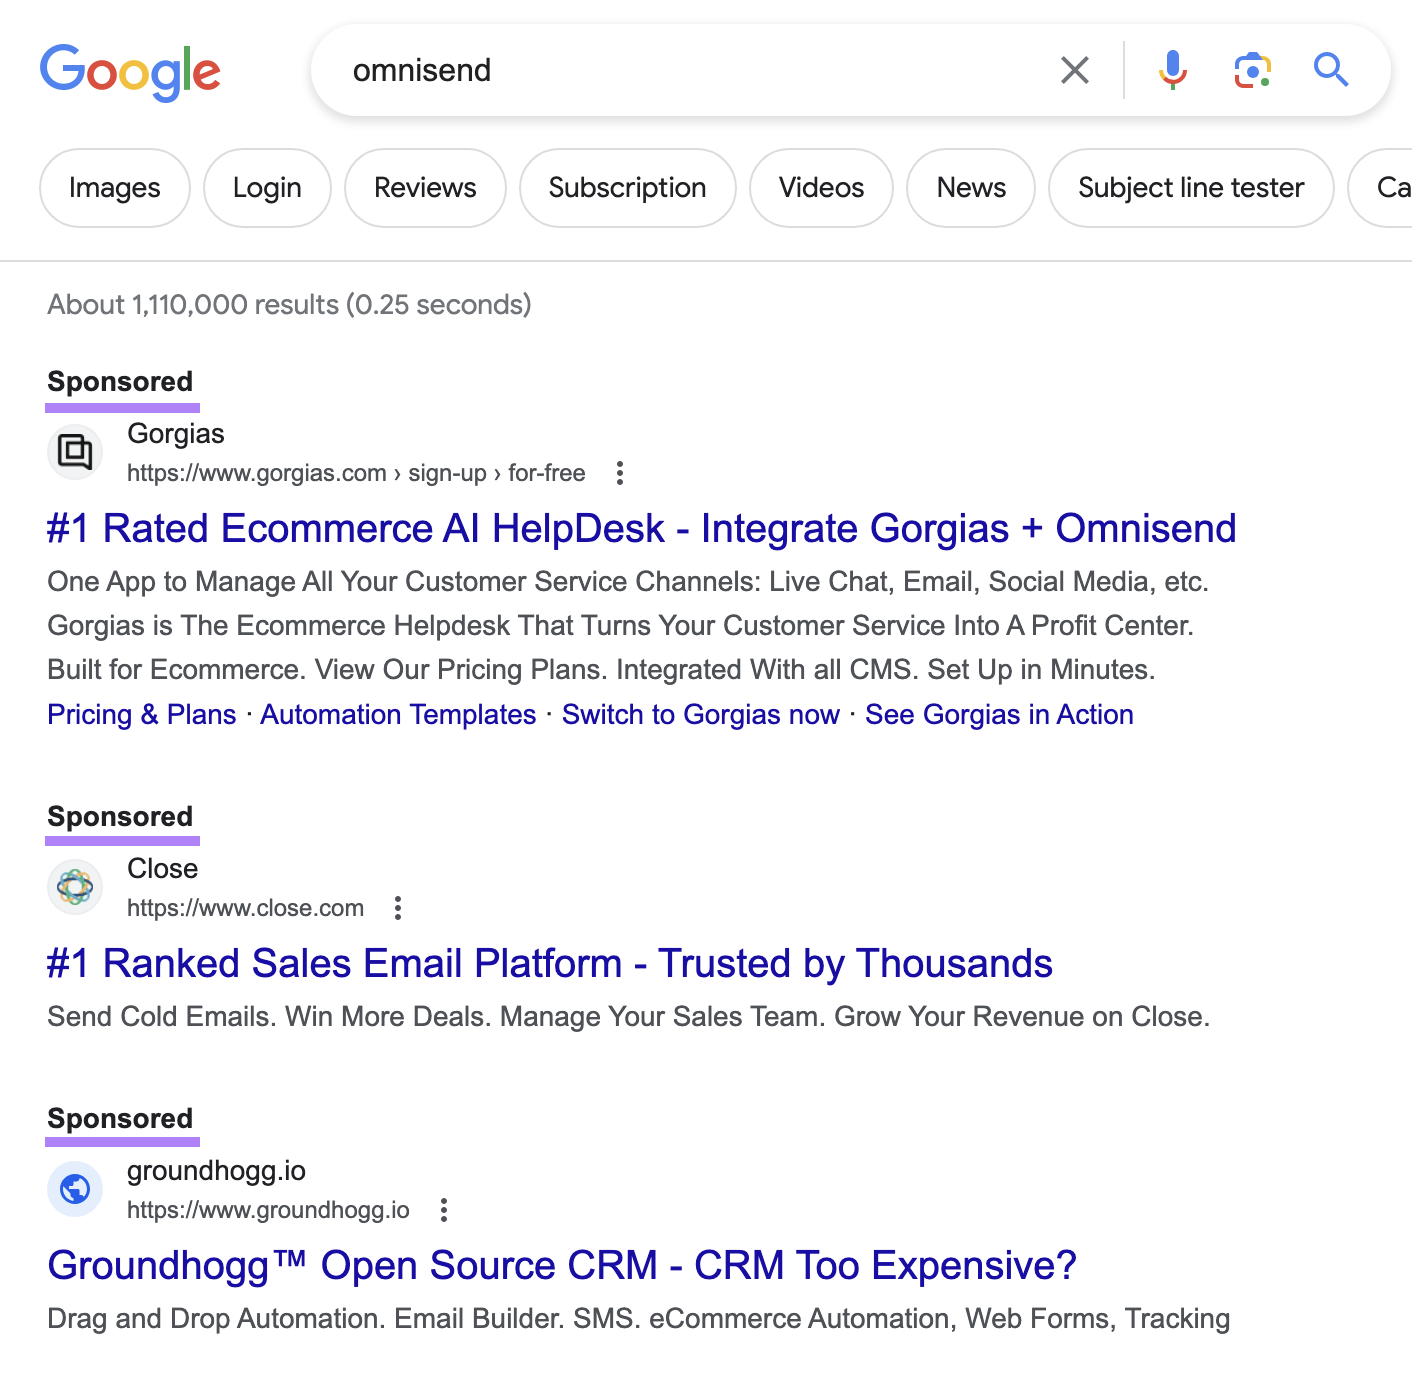 Sponsored results highlighted on Google SERP for "omnisend" search